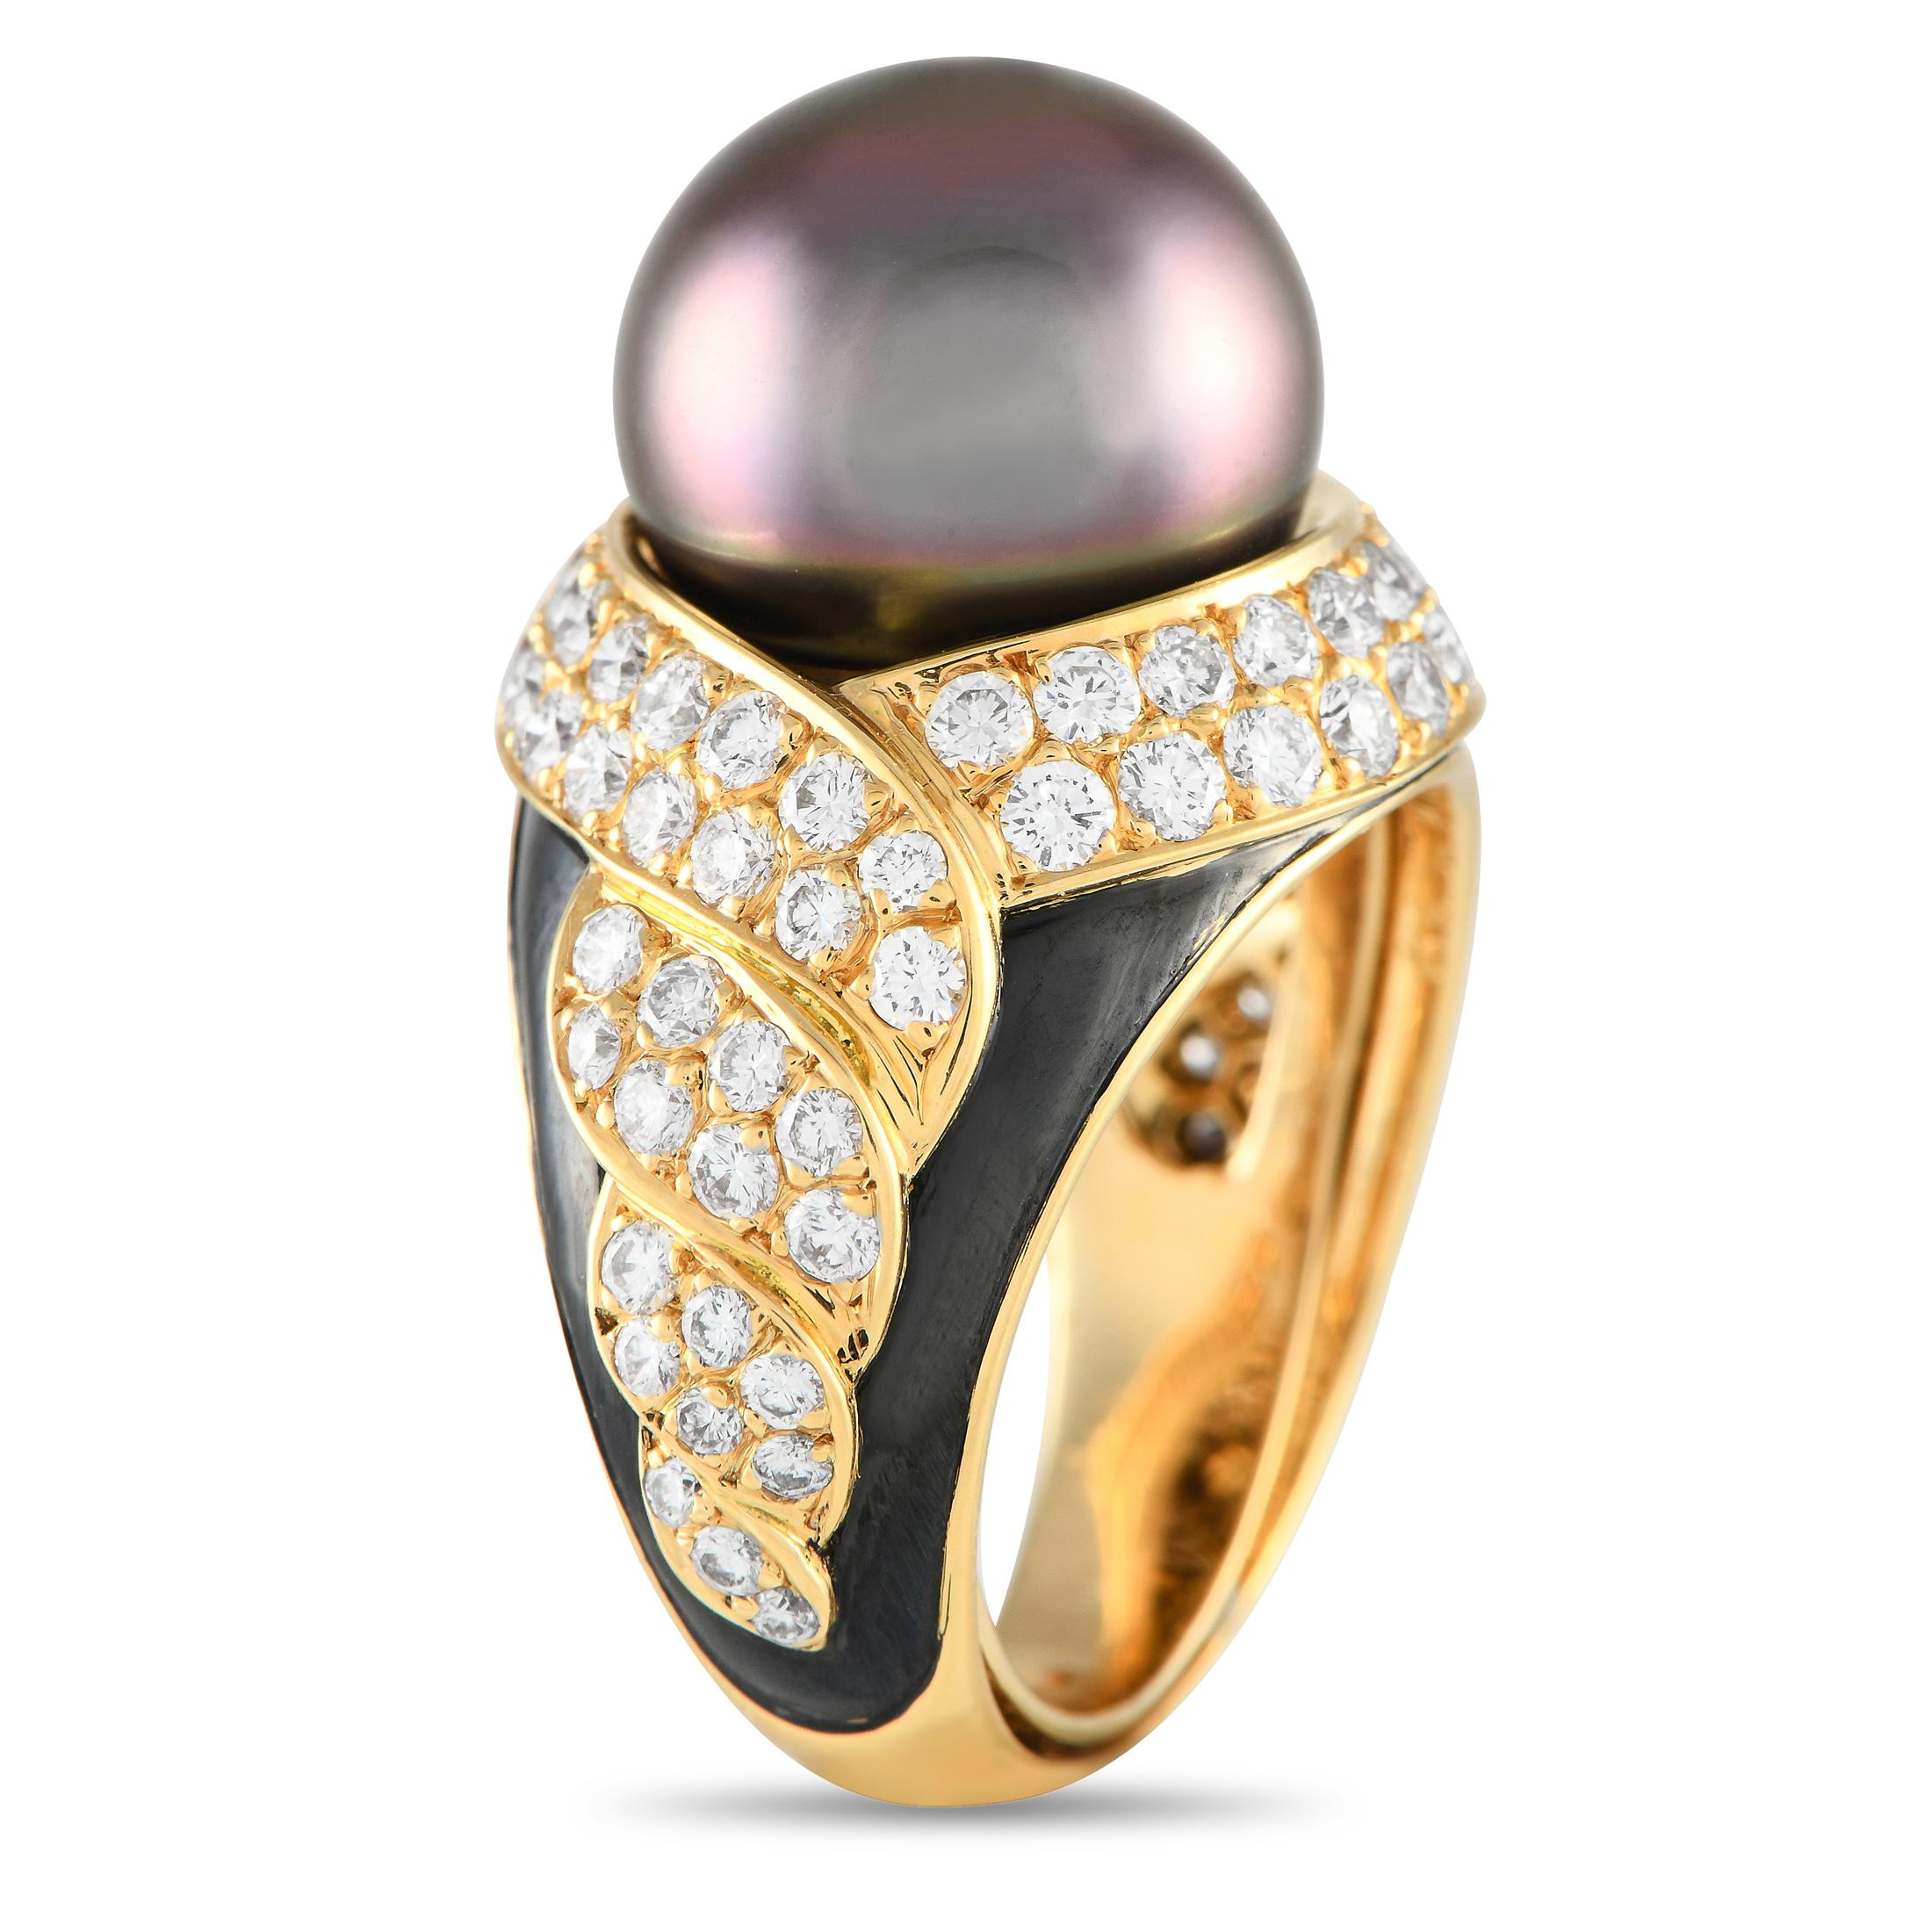 Bring life to a monochromatic outfit with this ultra-gorgeous statement ring. This piece features an eye-catching 12.6mm Tahitian Pearl sitting prominently on a wide band. The 18K yellow gold shank has a black inlay on its tapering shoulders. A